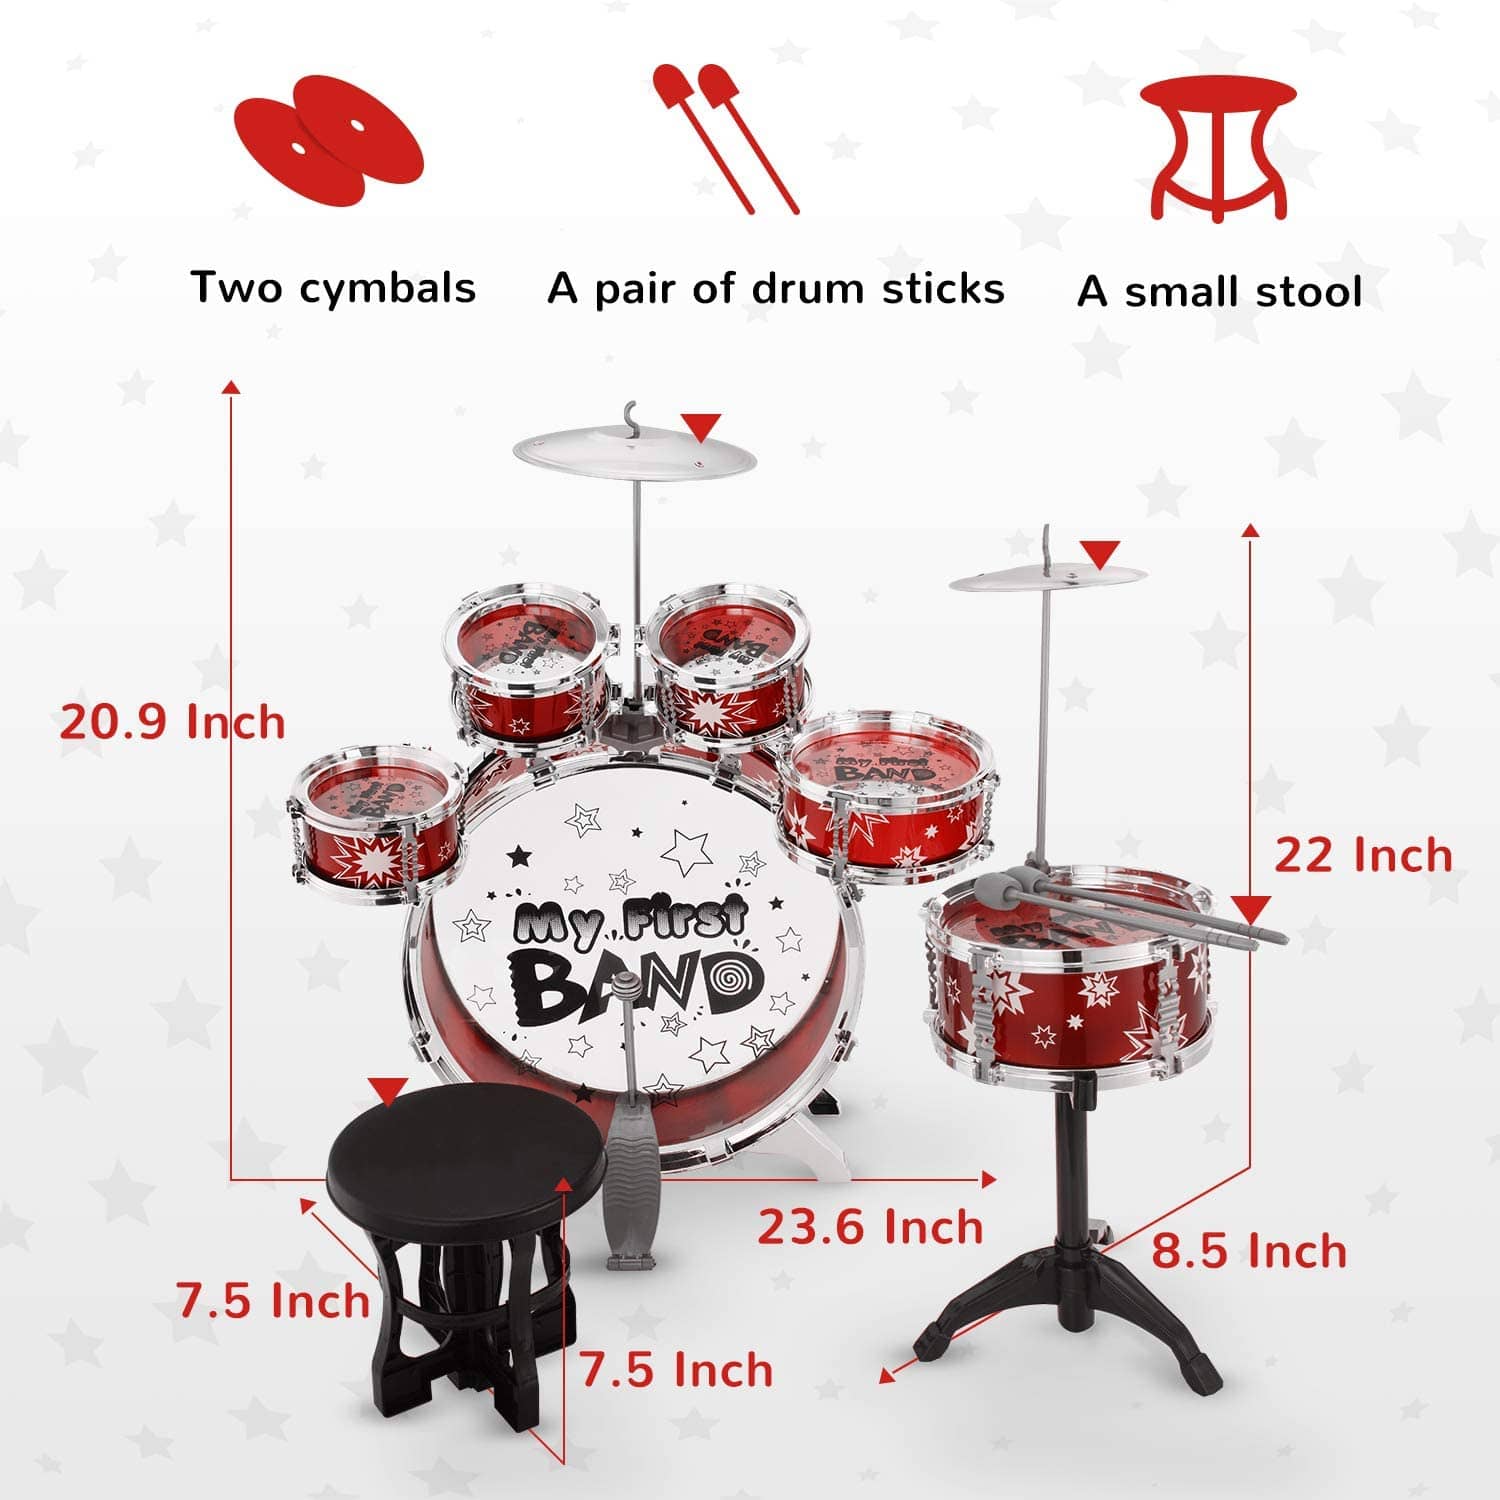 Reditmo Kids Jazz Drum Set, 6 Drums, 2 Cymbals, Chair, Kick Pedal, 2 Drumsticks, Stool, Early Education Musical Instrument to Develop Children’s Creativity, Red 12